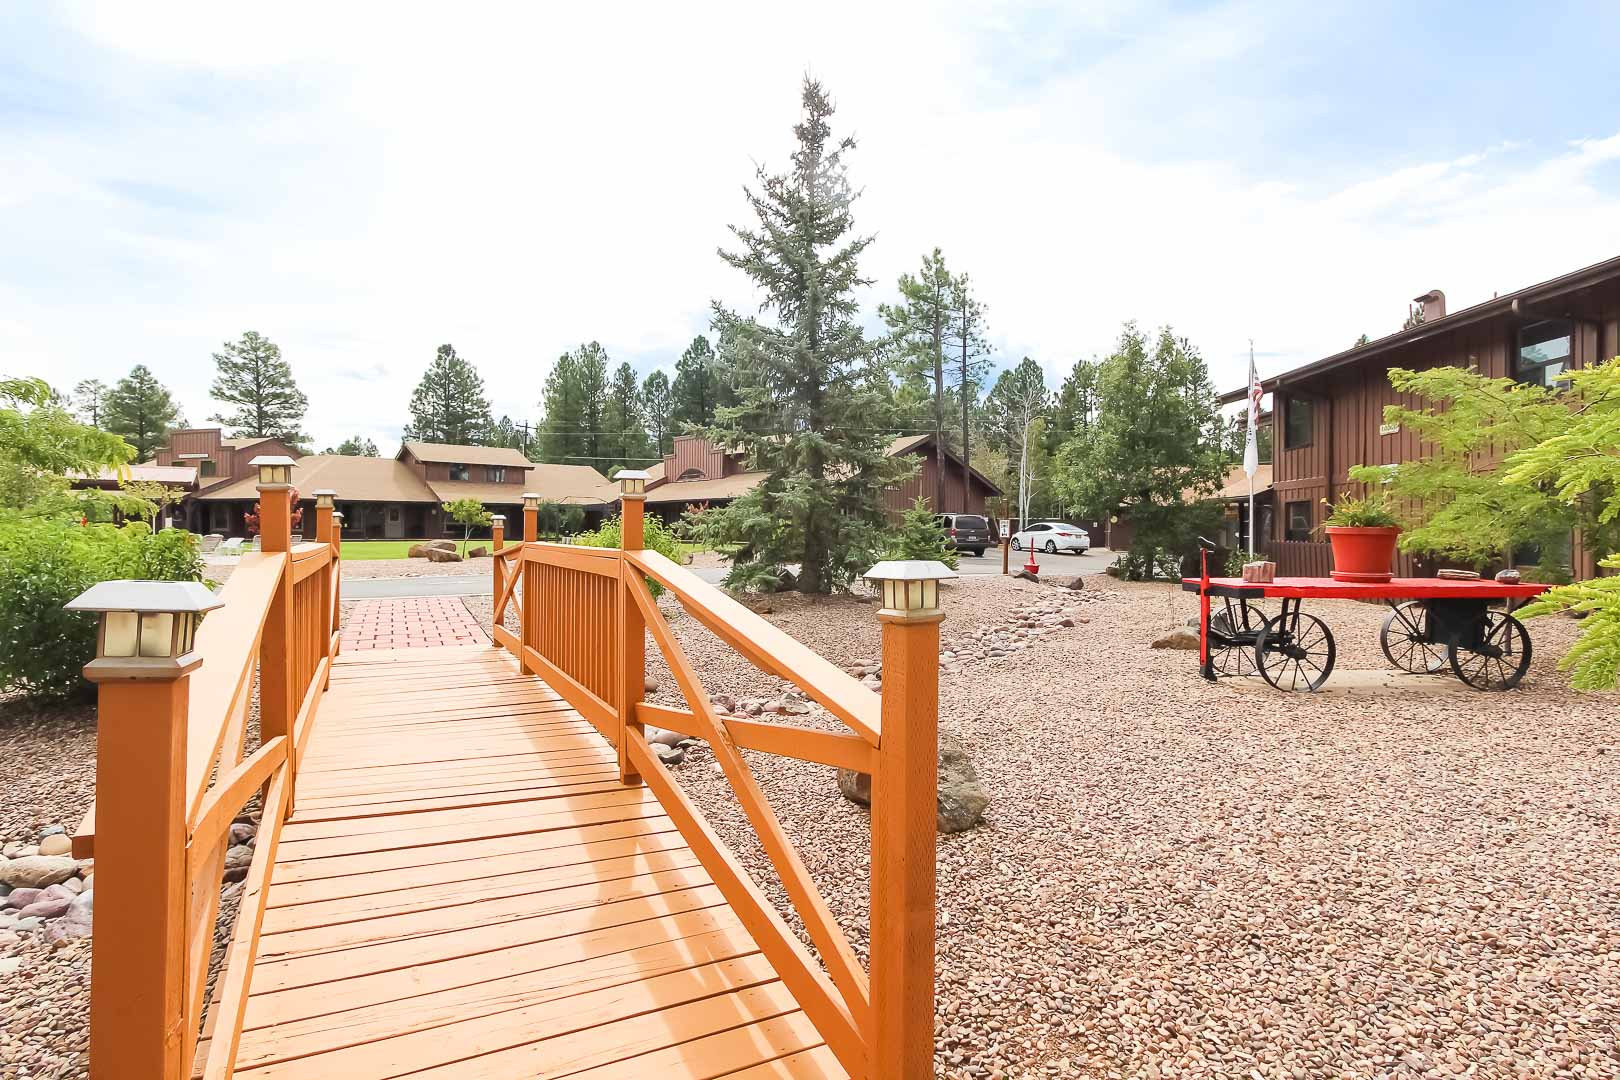 A welcoming entrance at VRI's Roundhouse Resort in Pinetop, Arizona.